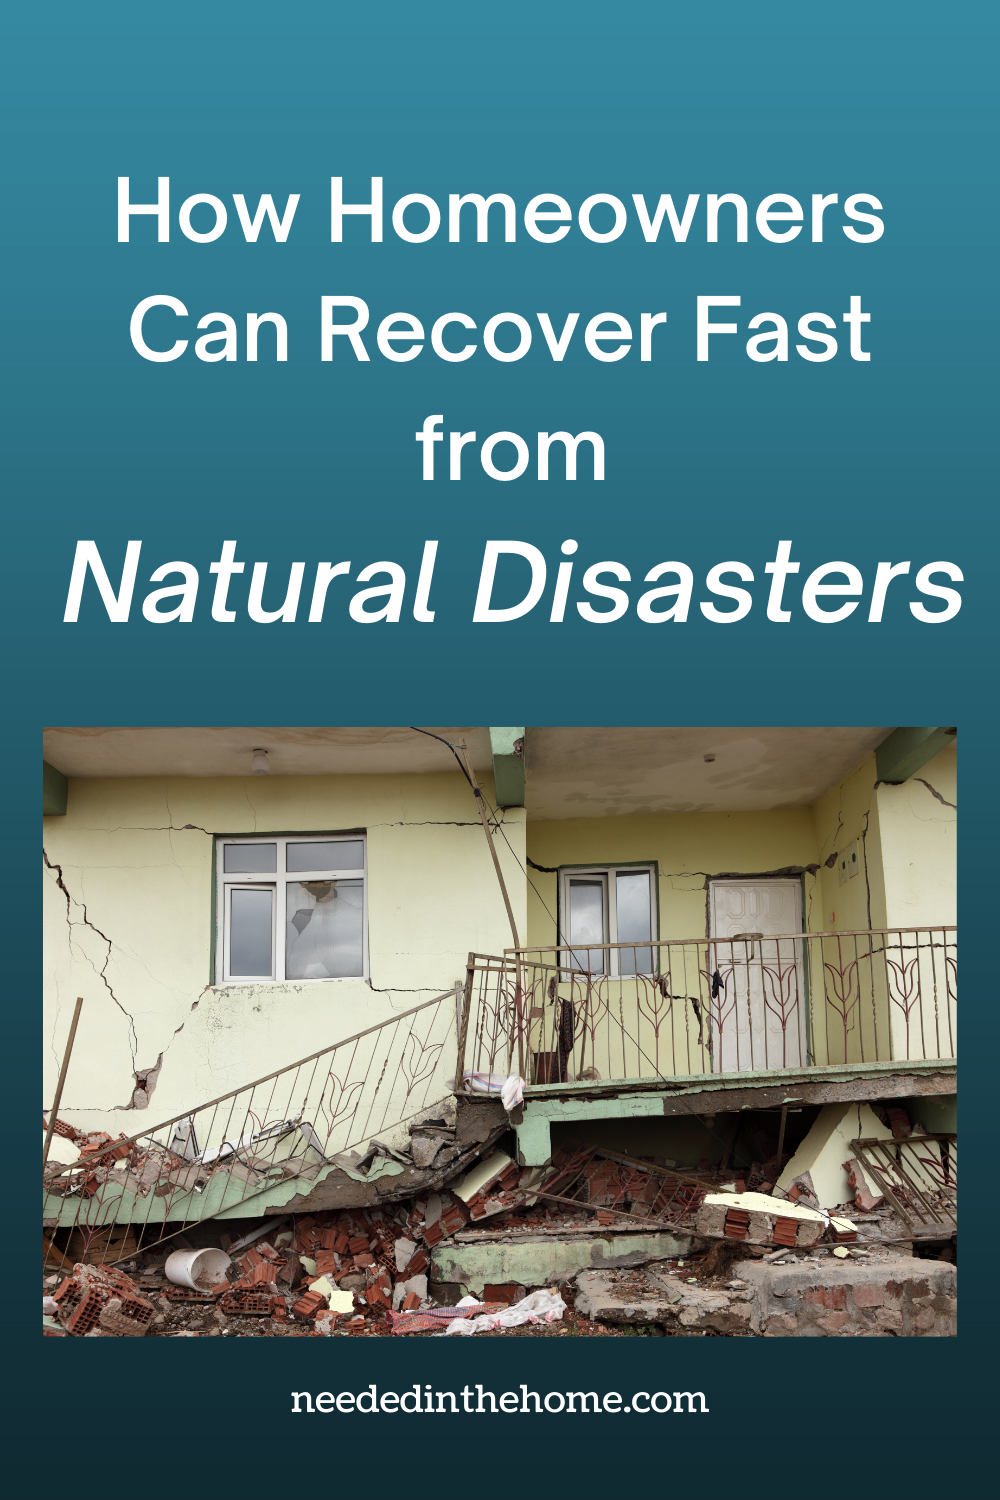 pinterest-pin-description how homeowners can recover fast from natural disasters yellow one story home wrecked cracked by earthquake neededinthehome